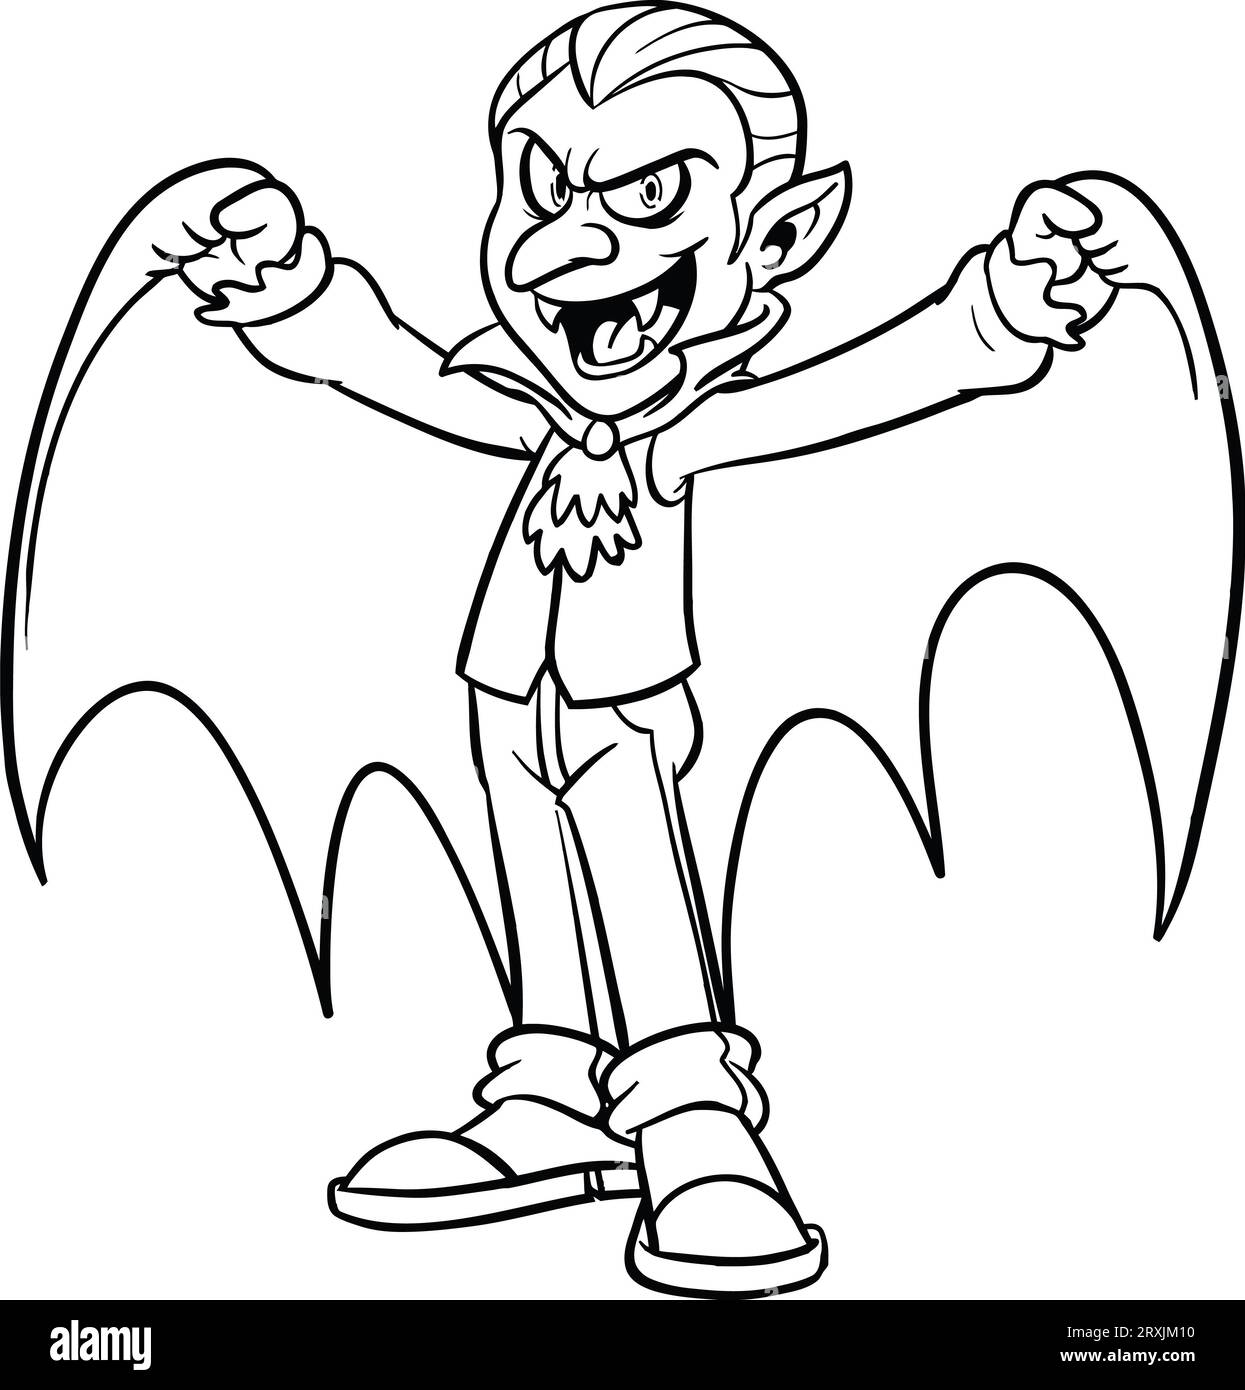 Vampire Halloween Coloring Page for Kids Free Vector Stock Photo